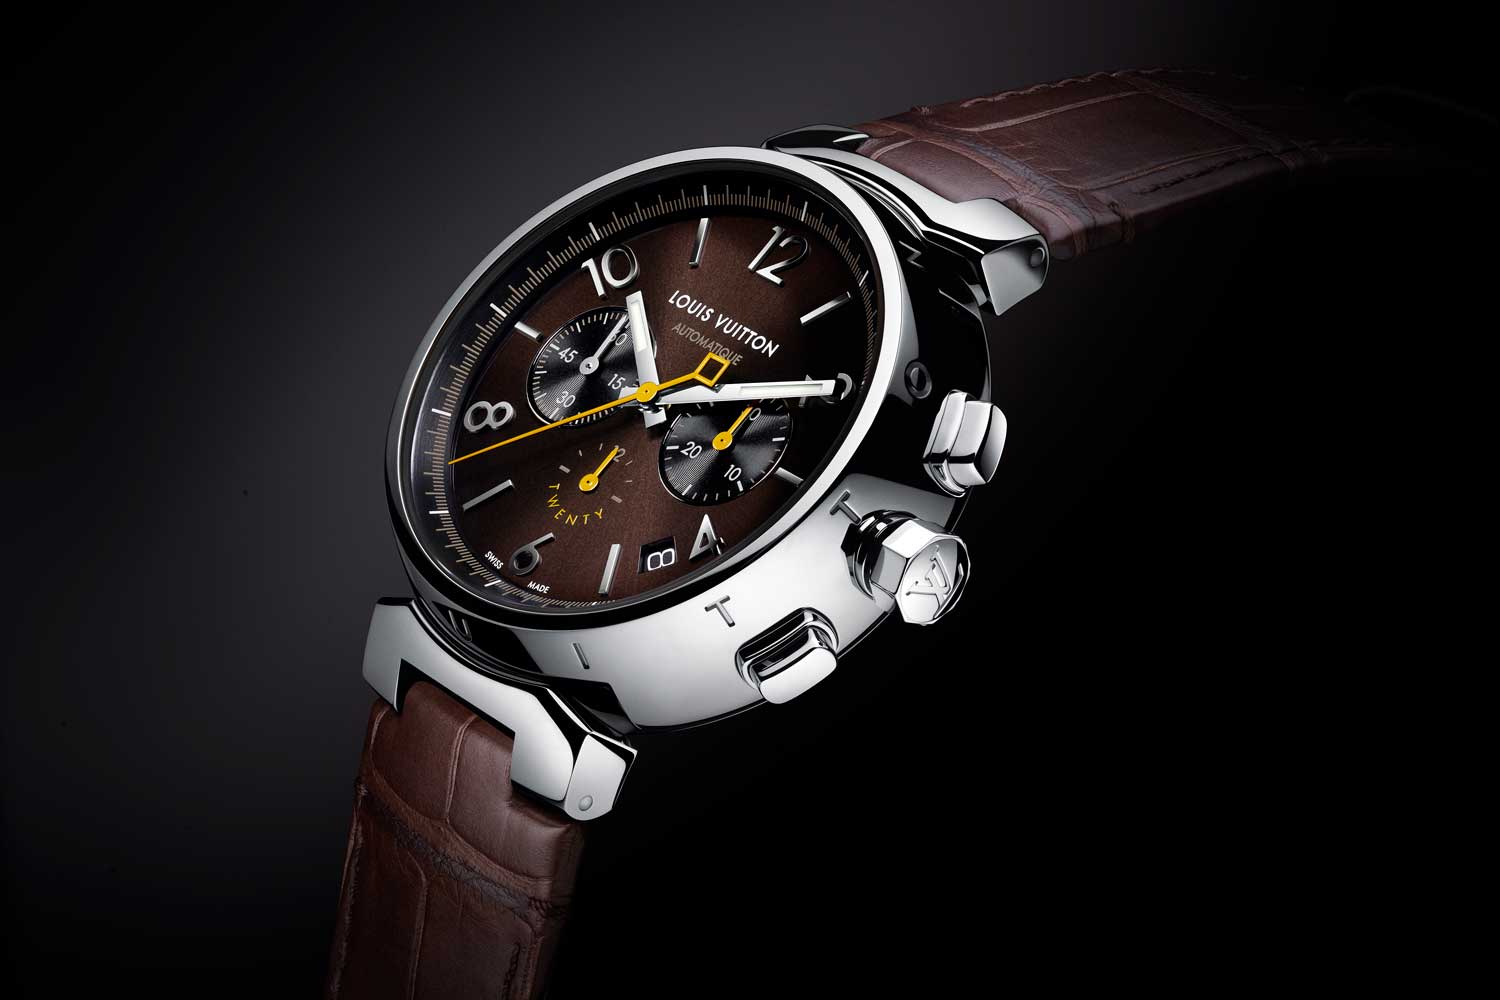 As a tribute to the original 2002 Tambour, on the flared-shaped 41.5 mm case are the twelve letters that make up the name “Louis Vuitton” across the numbers and indexes